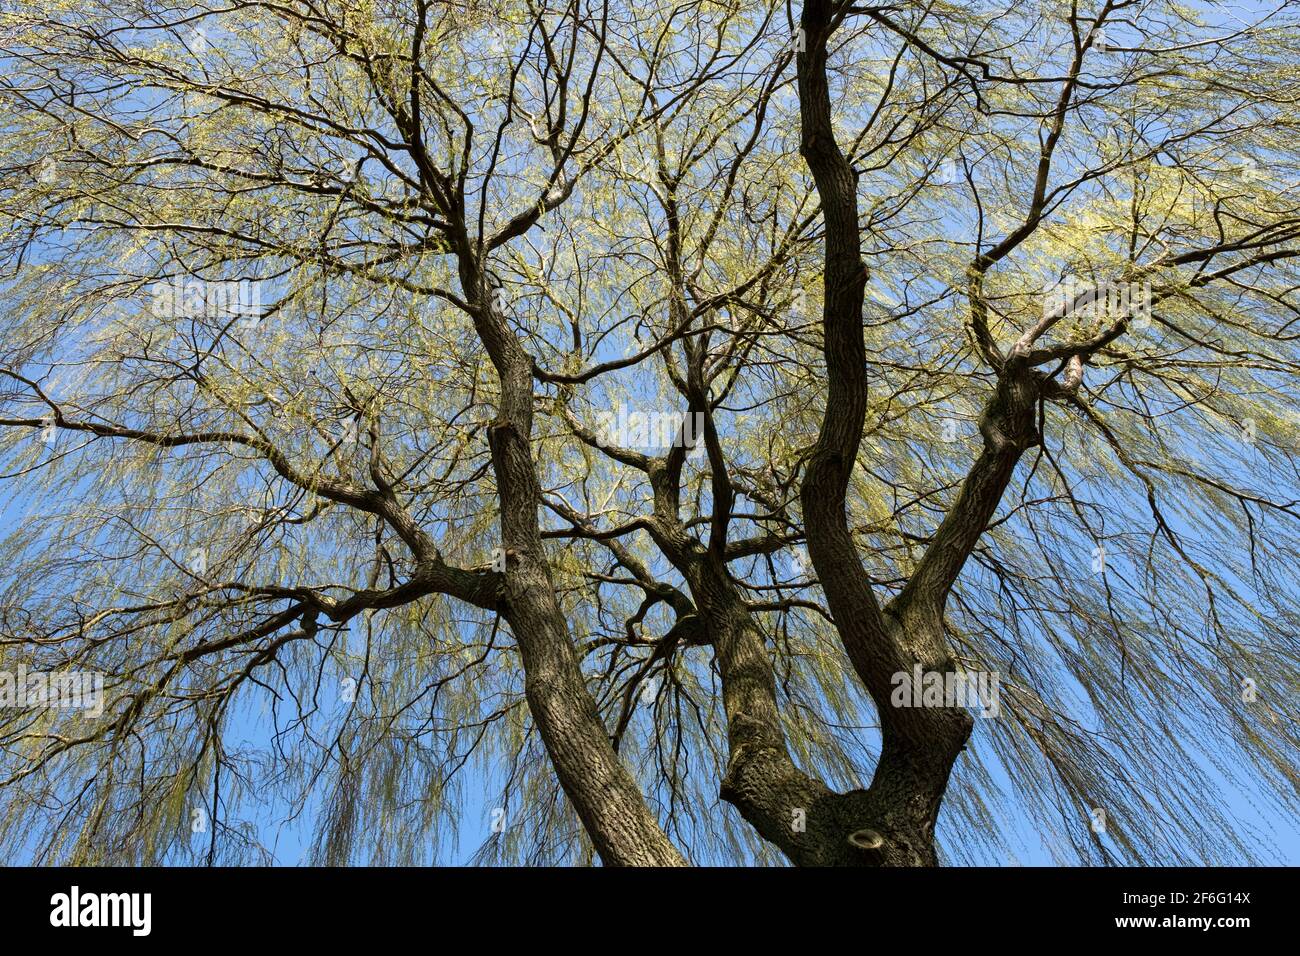 Salix babylonica (Babylon willow or weeping willow) tree with light green twigs and leaves hanging like falling rain in early spring at blue sky Stock Photo